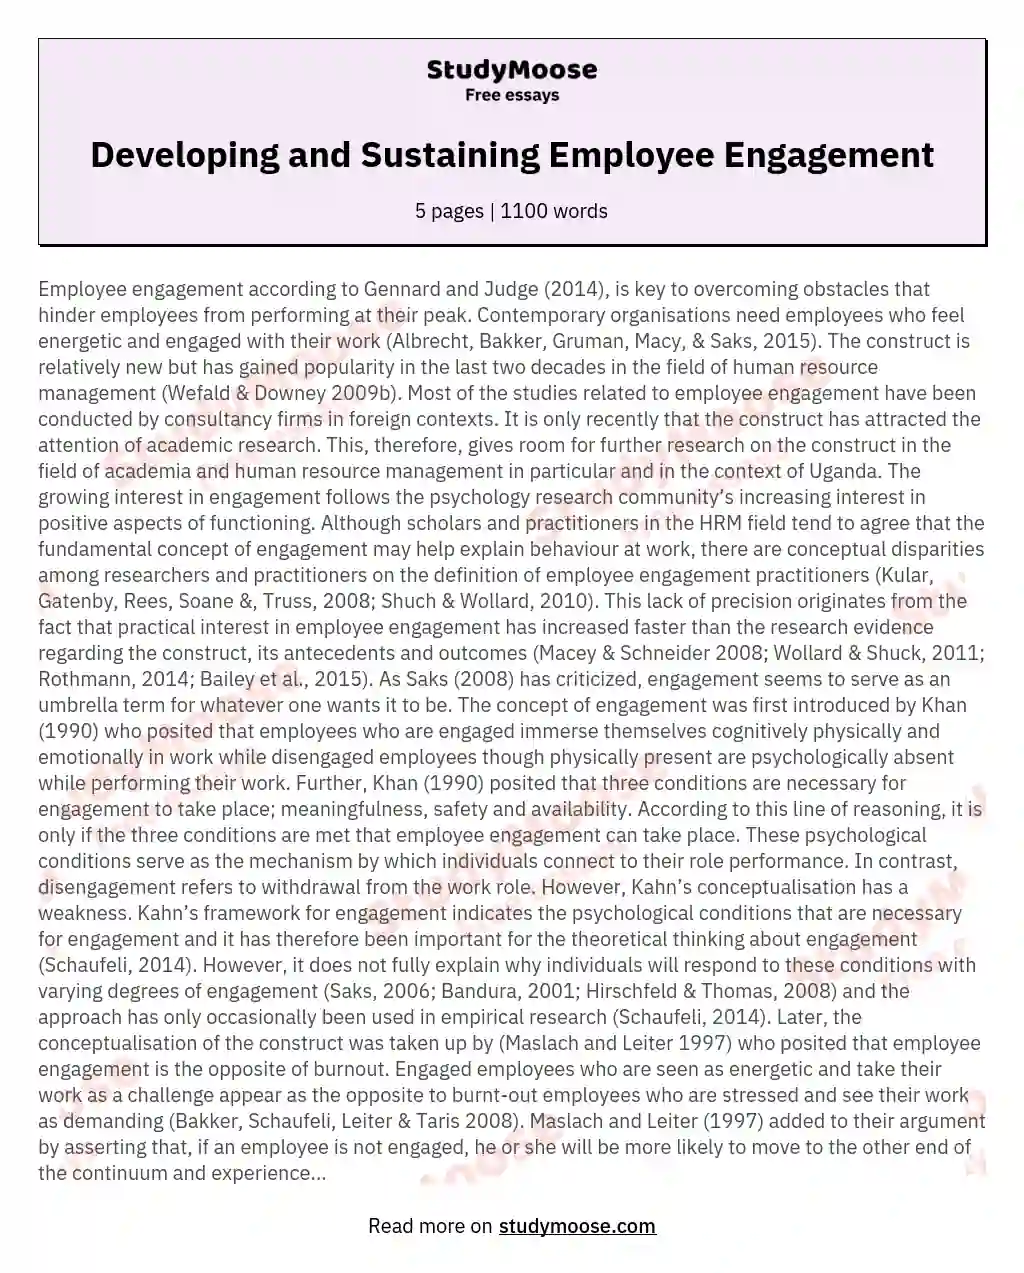 Developing and Sustaining Employee Engagement essay